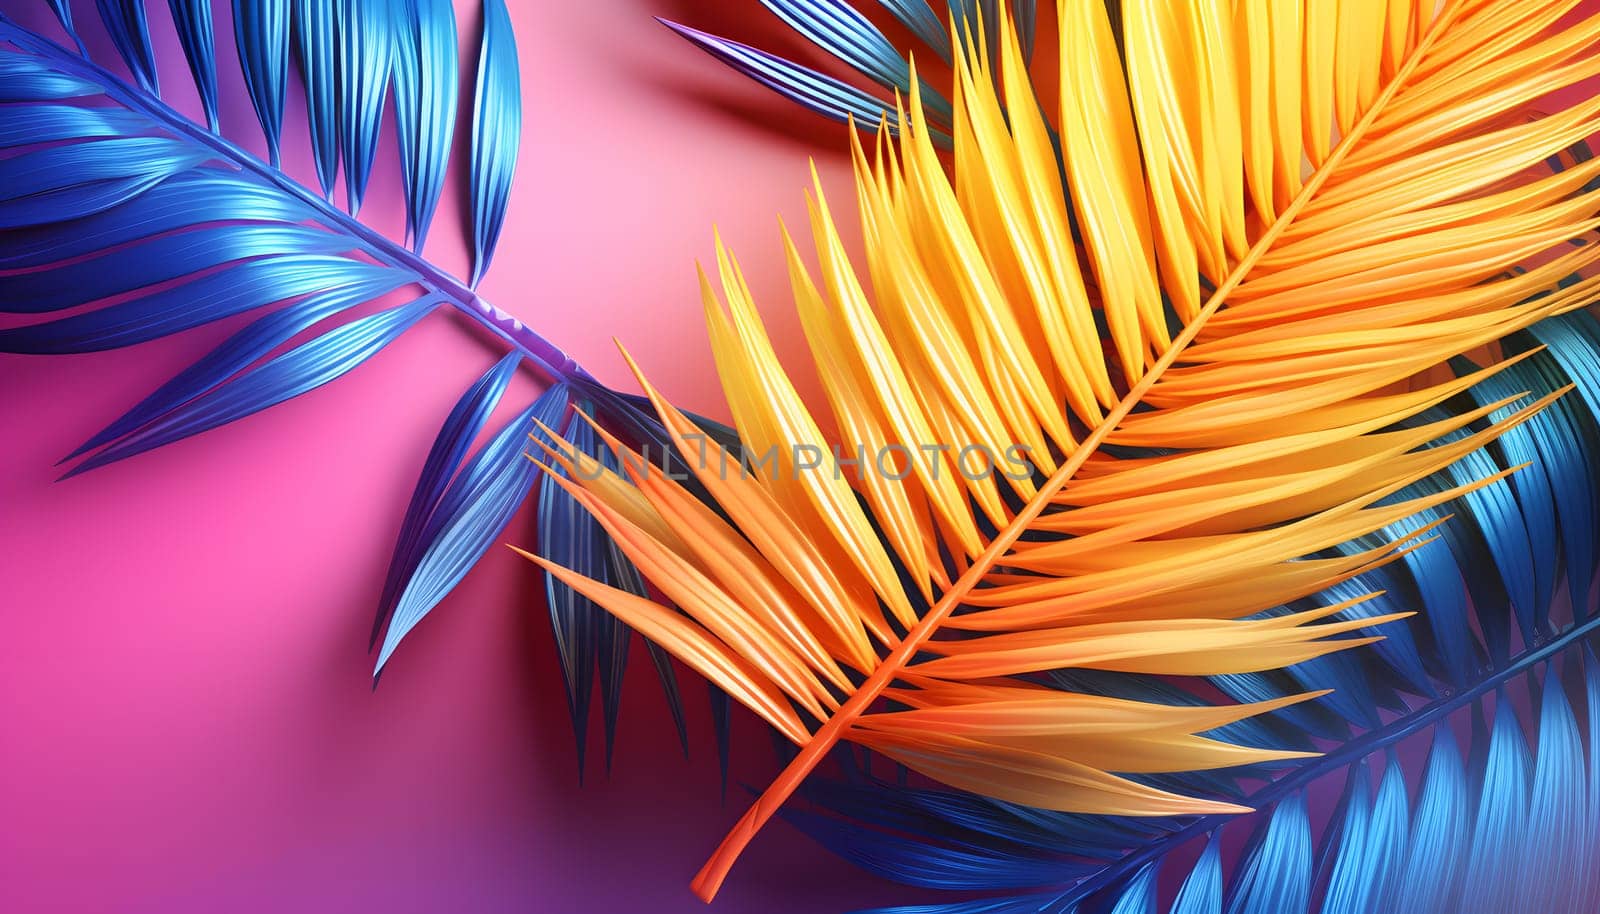 This photo showcases a close-up view of a vibrant and colorful palm leaf, displaying its intricate patterns and gradient hues.